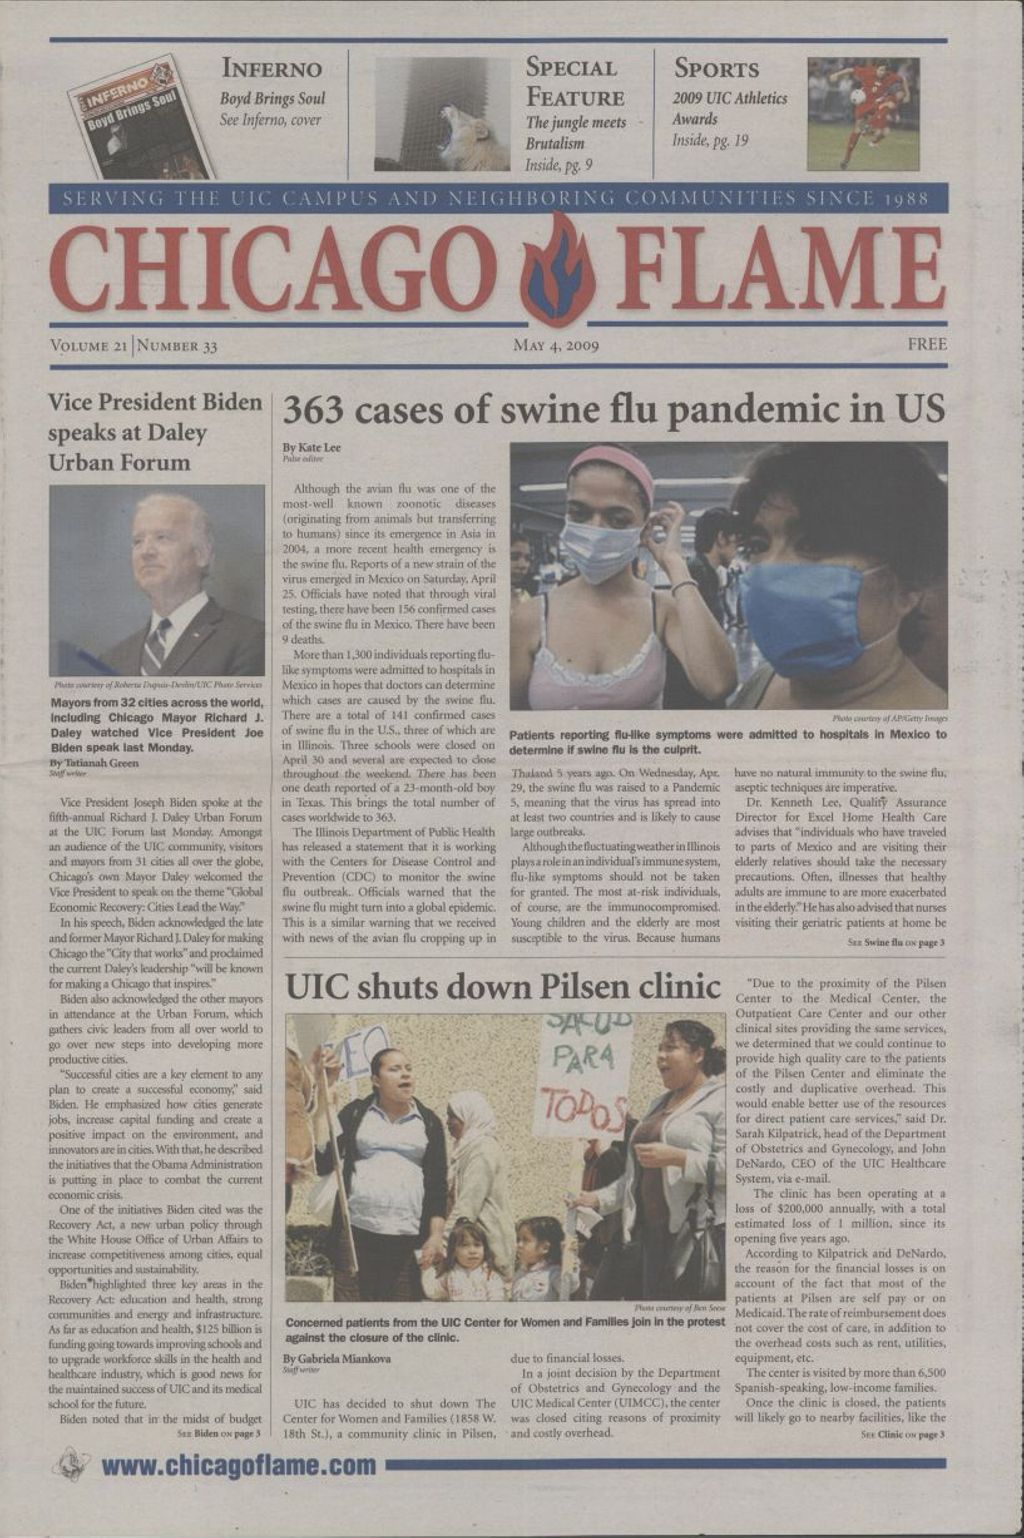 Miniature of Chicago Flame (May 4, 2009)